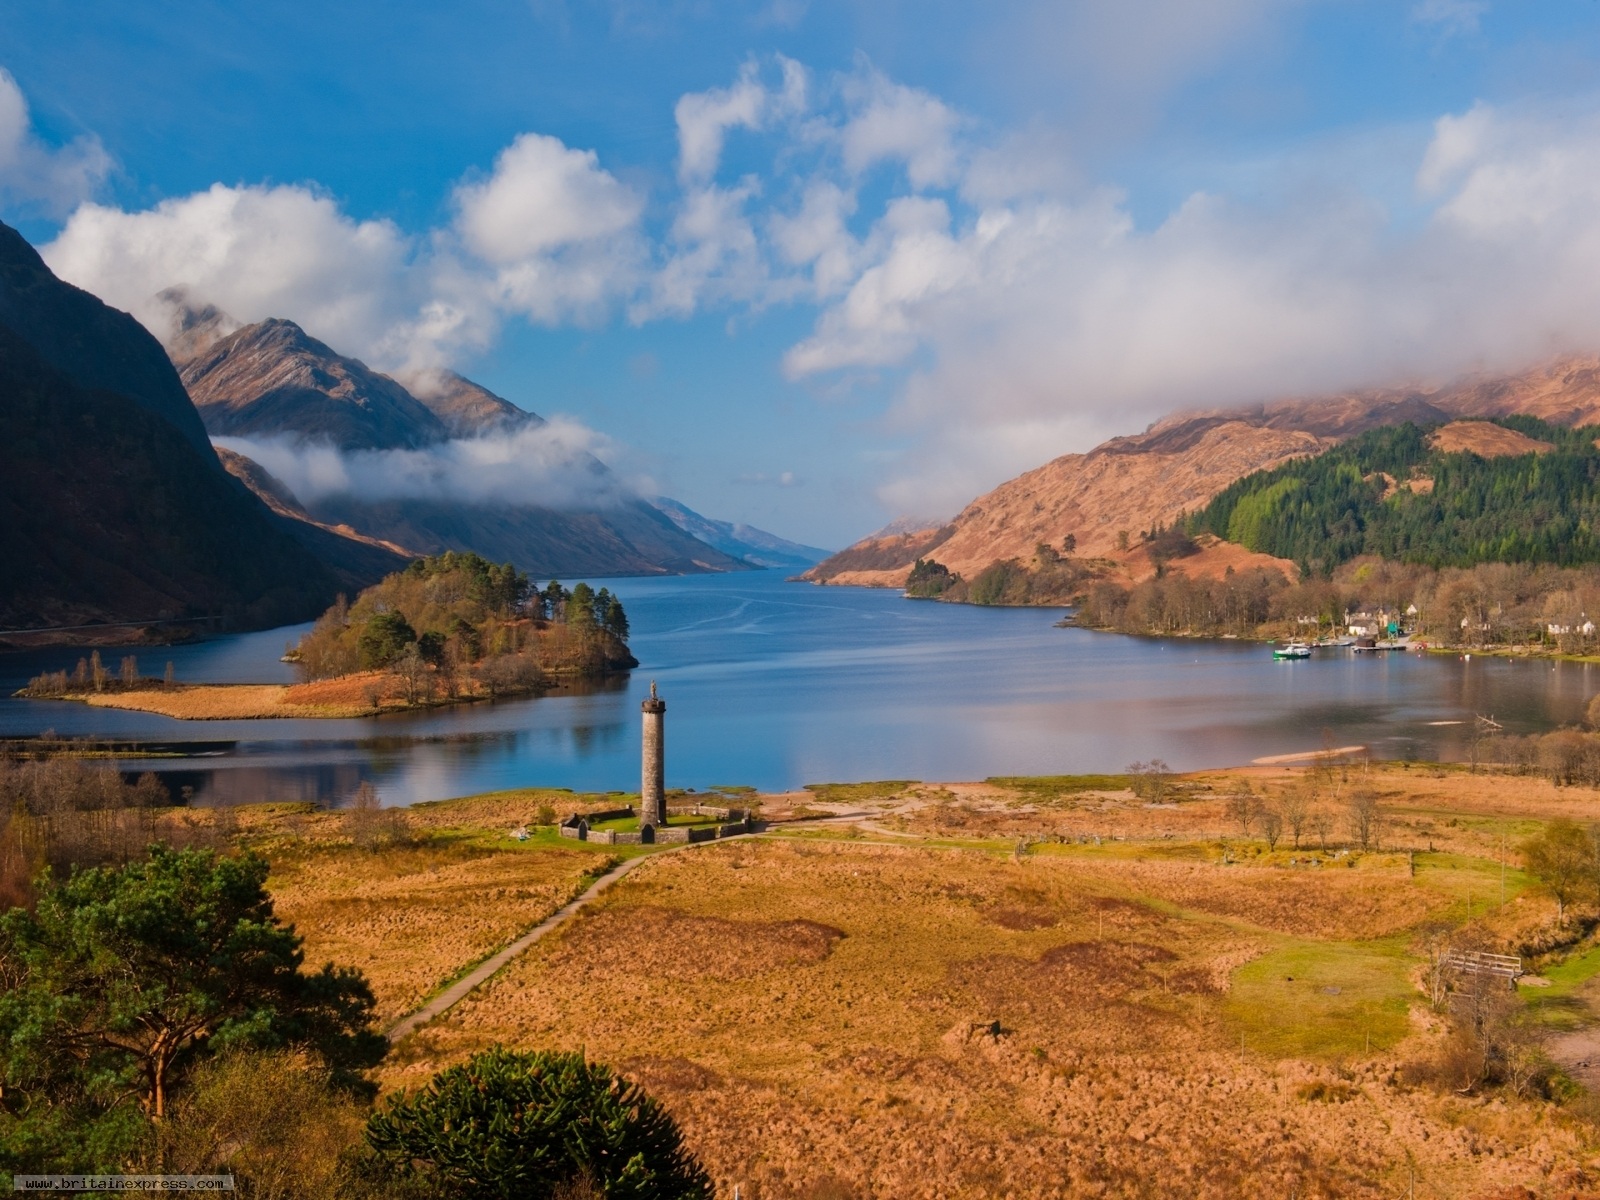 40 Free Dating Ideas with Breathtaking Views in Scotland